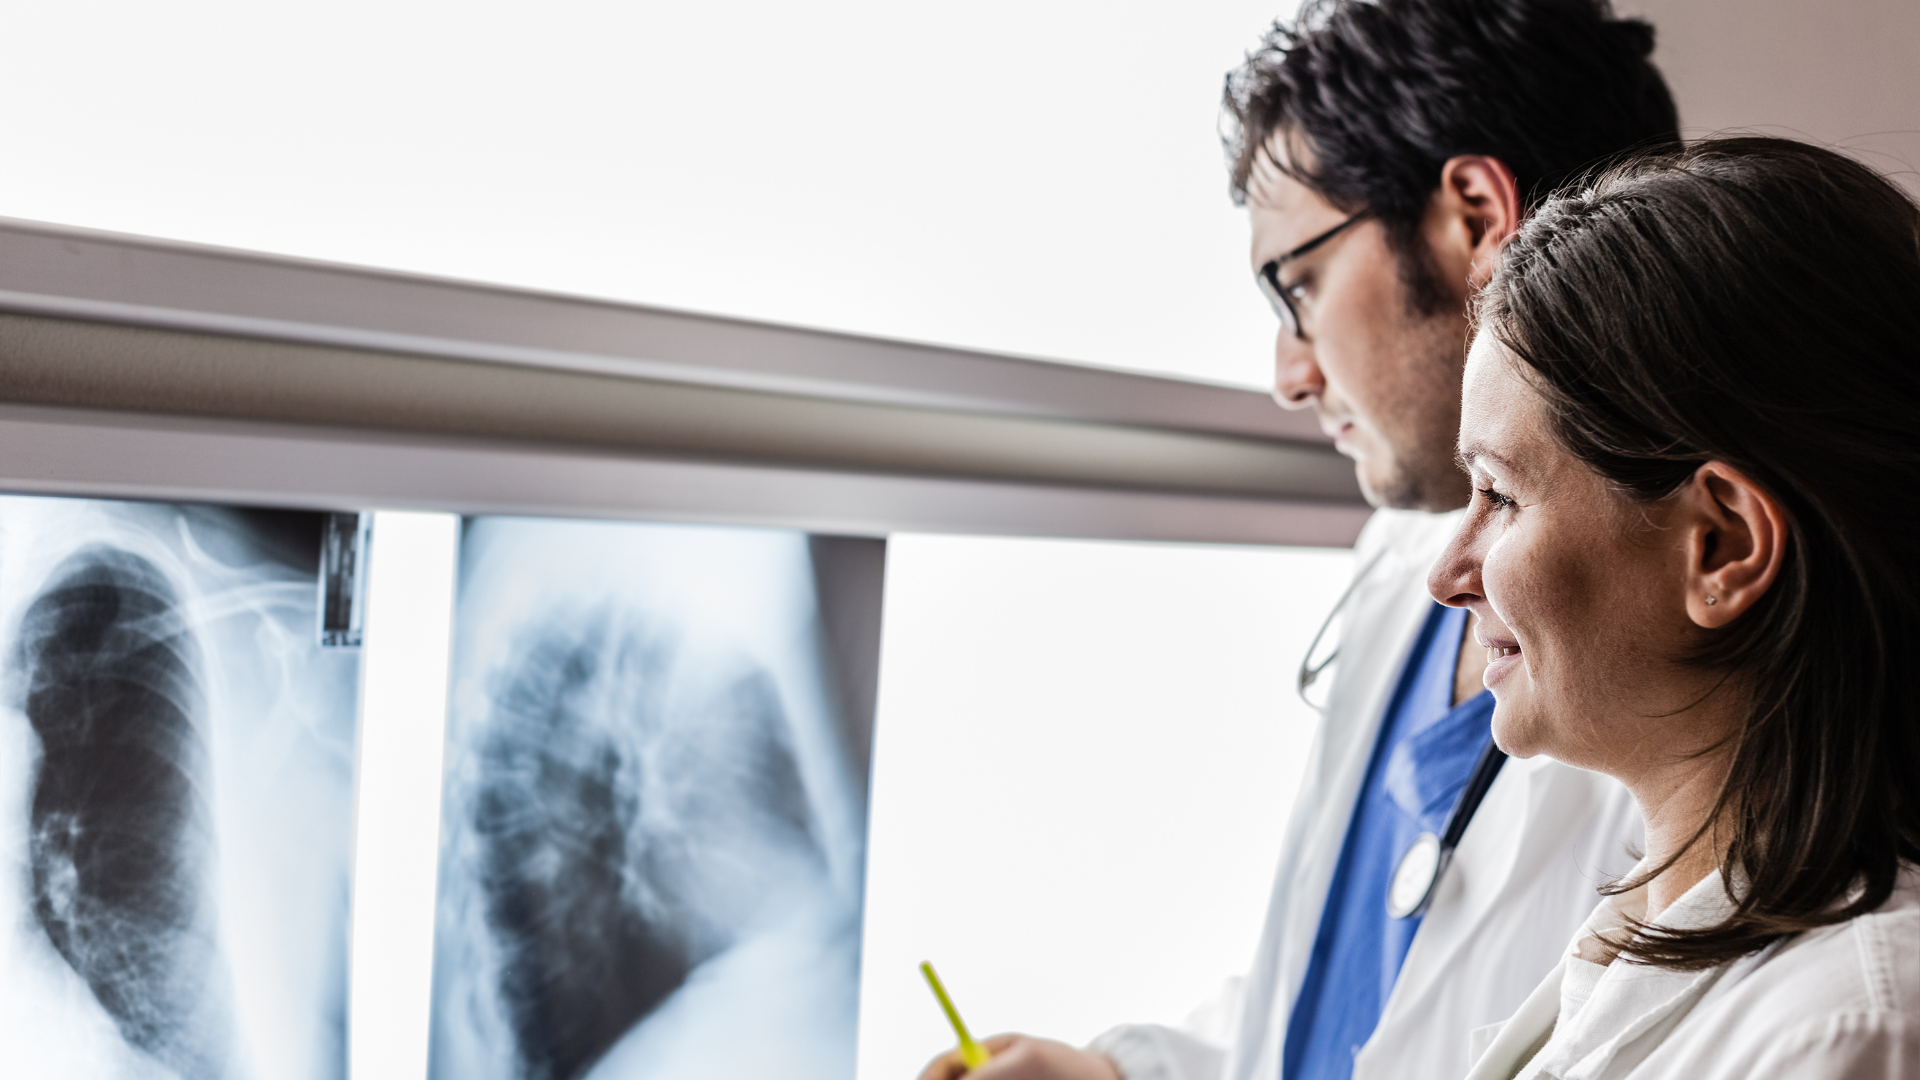 Questions to ask your radiologist